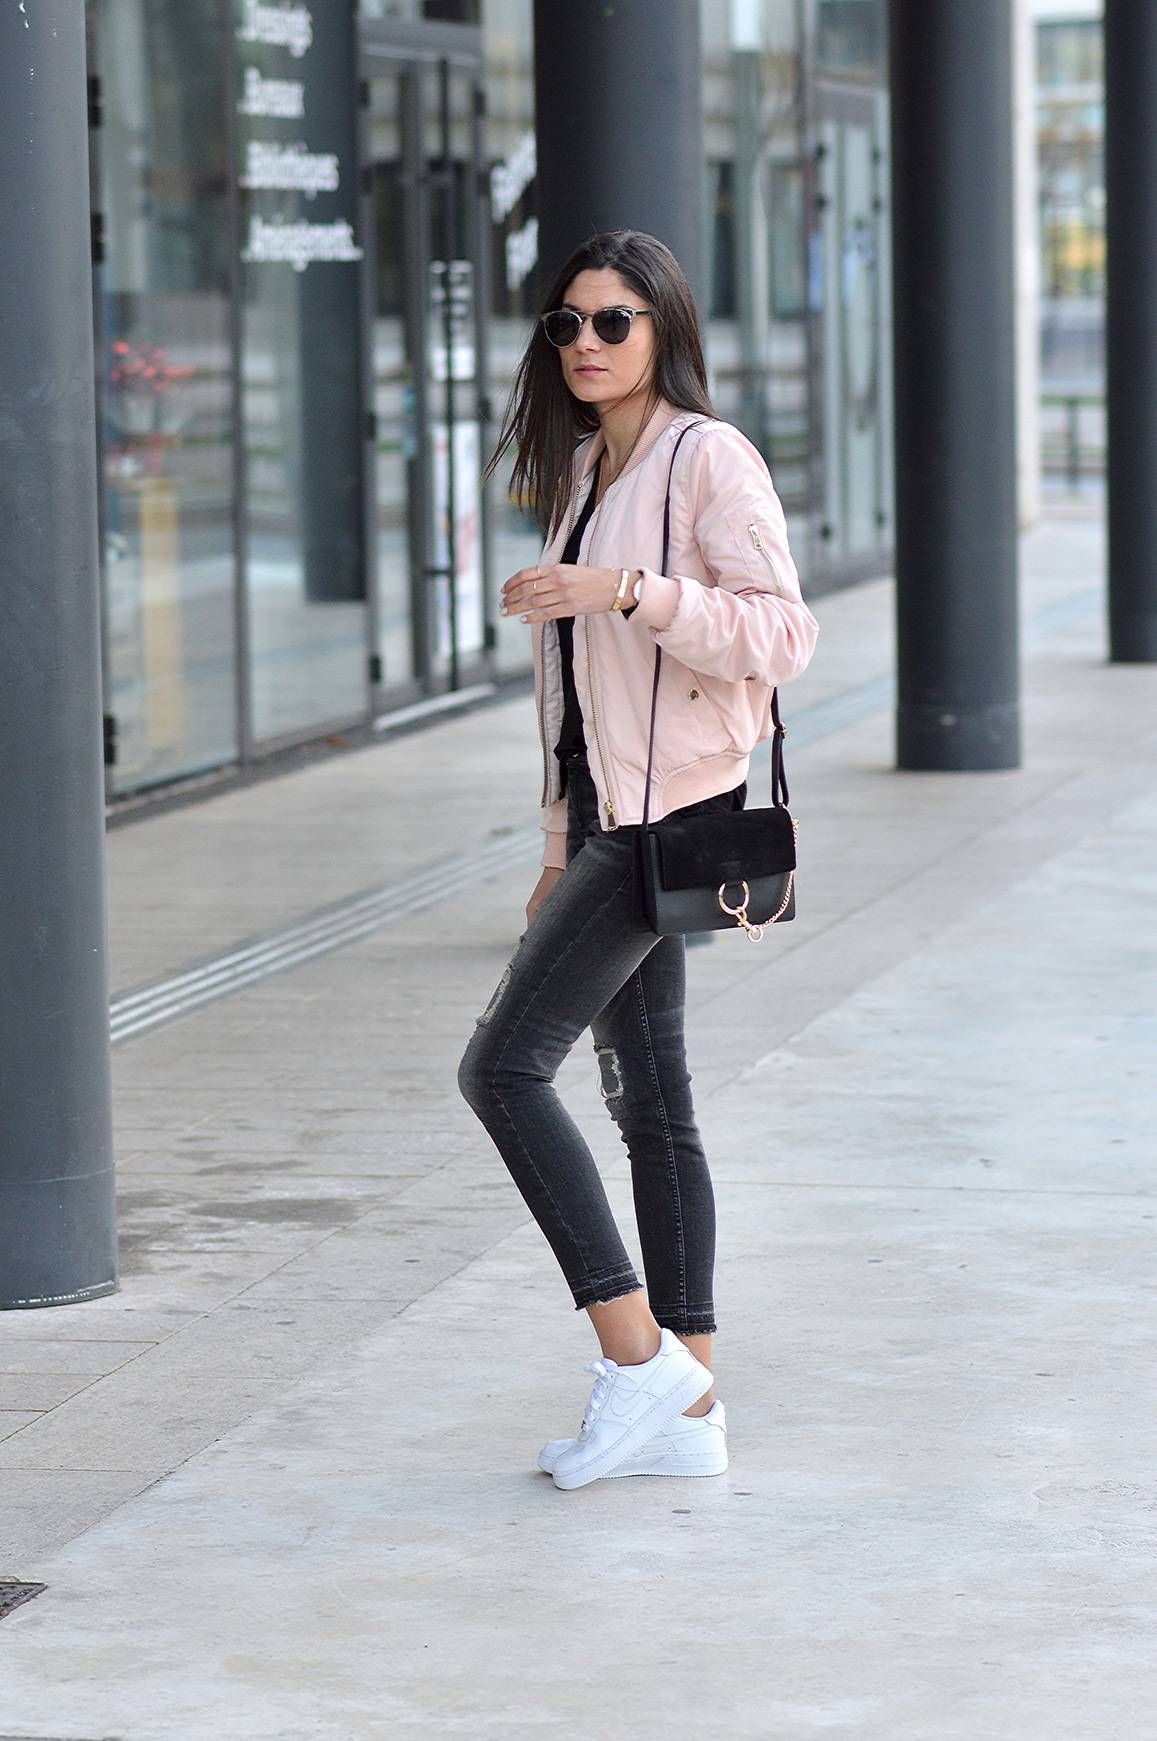 Federica L. wears the bomber jacket in a pretty shade of pale pink,  capturing casual and feminine vibes in her every day outfit.